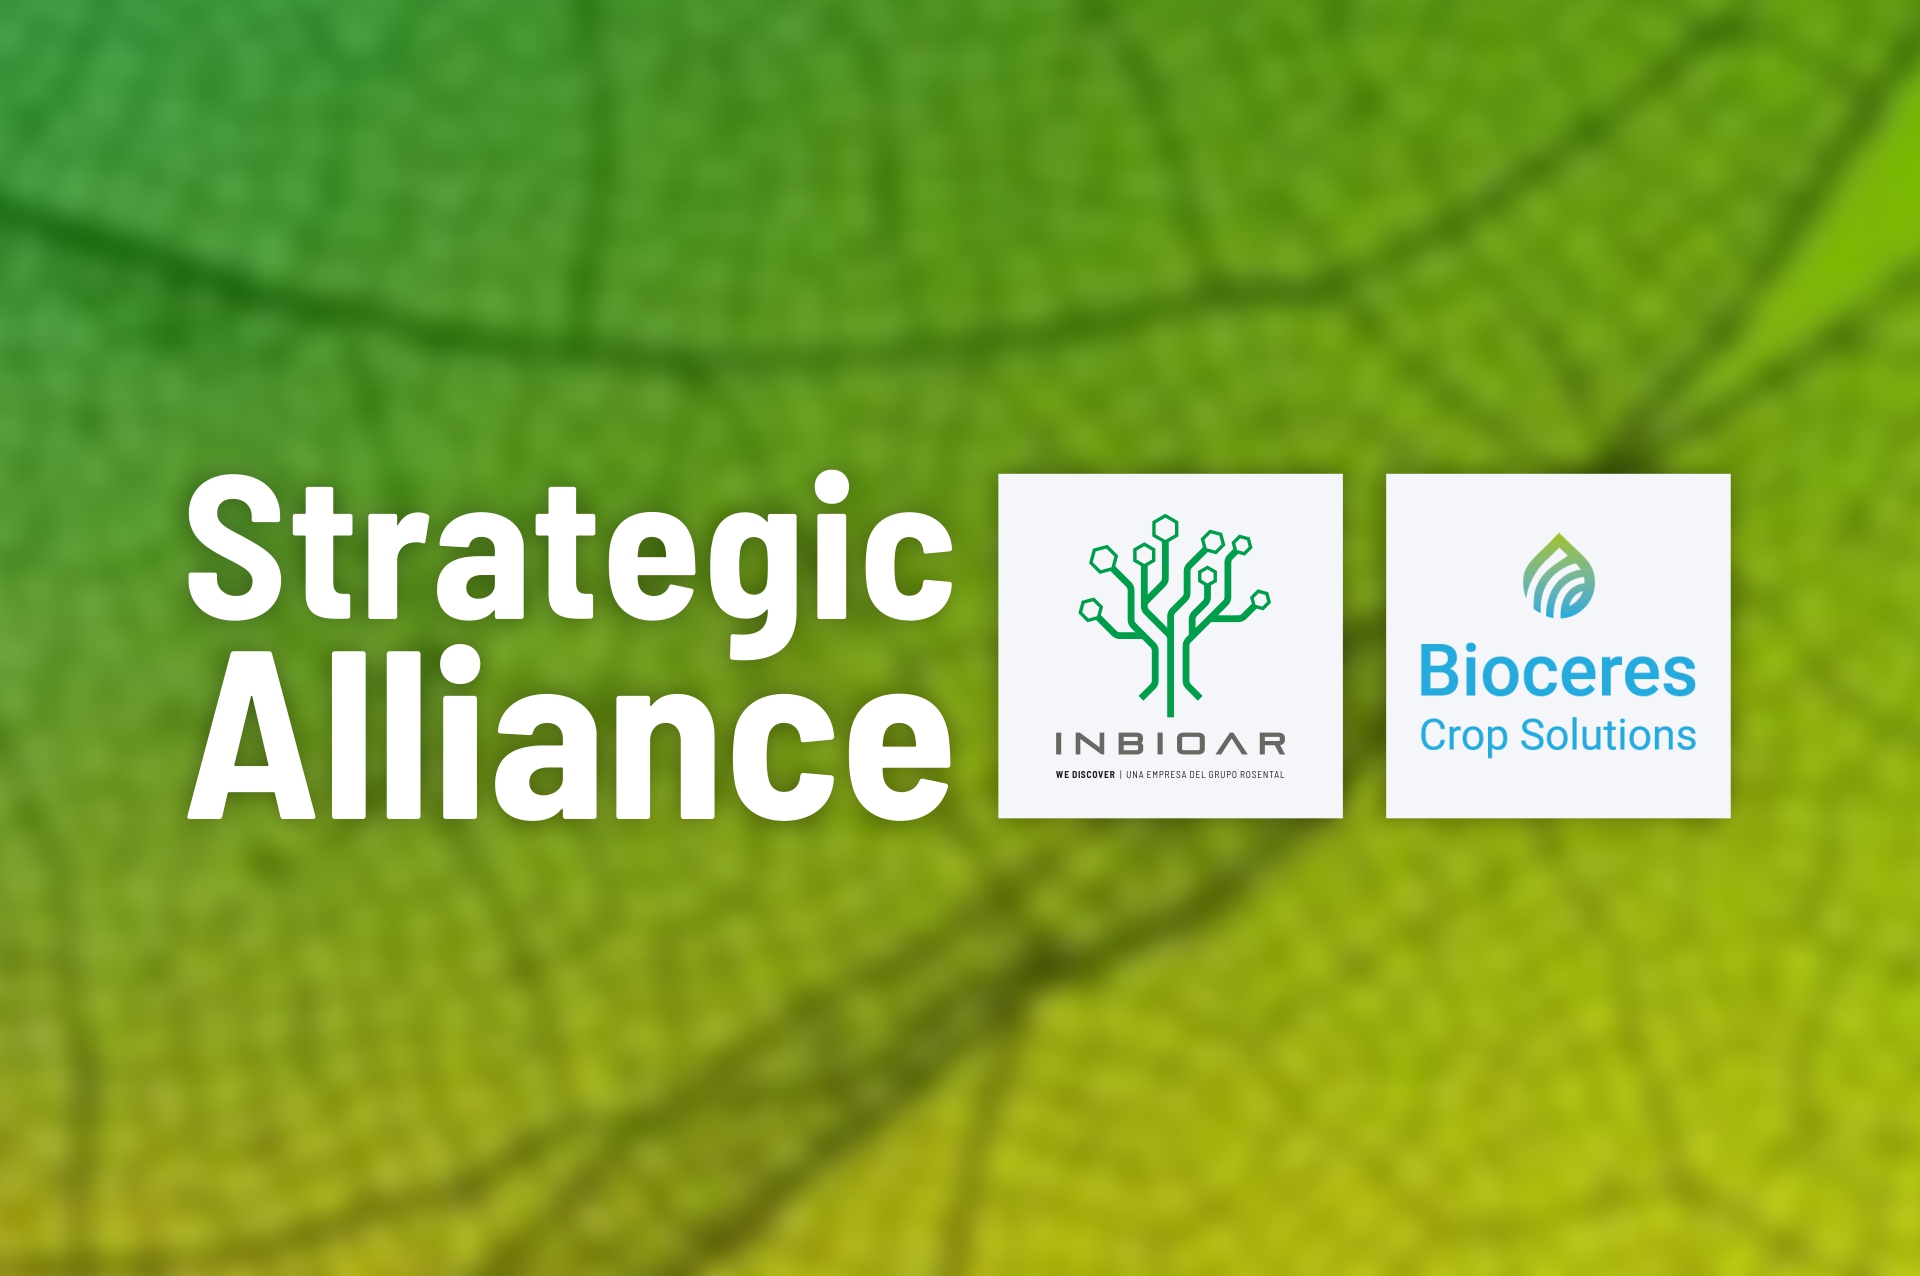 Bioceres Crop Solutions and INBIOAR sign an important strategic alliance.